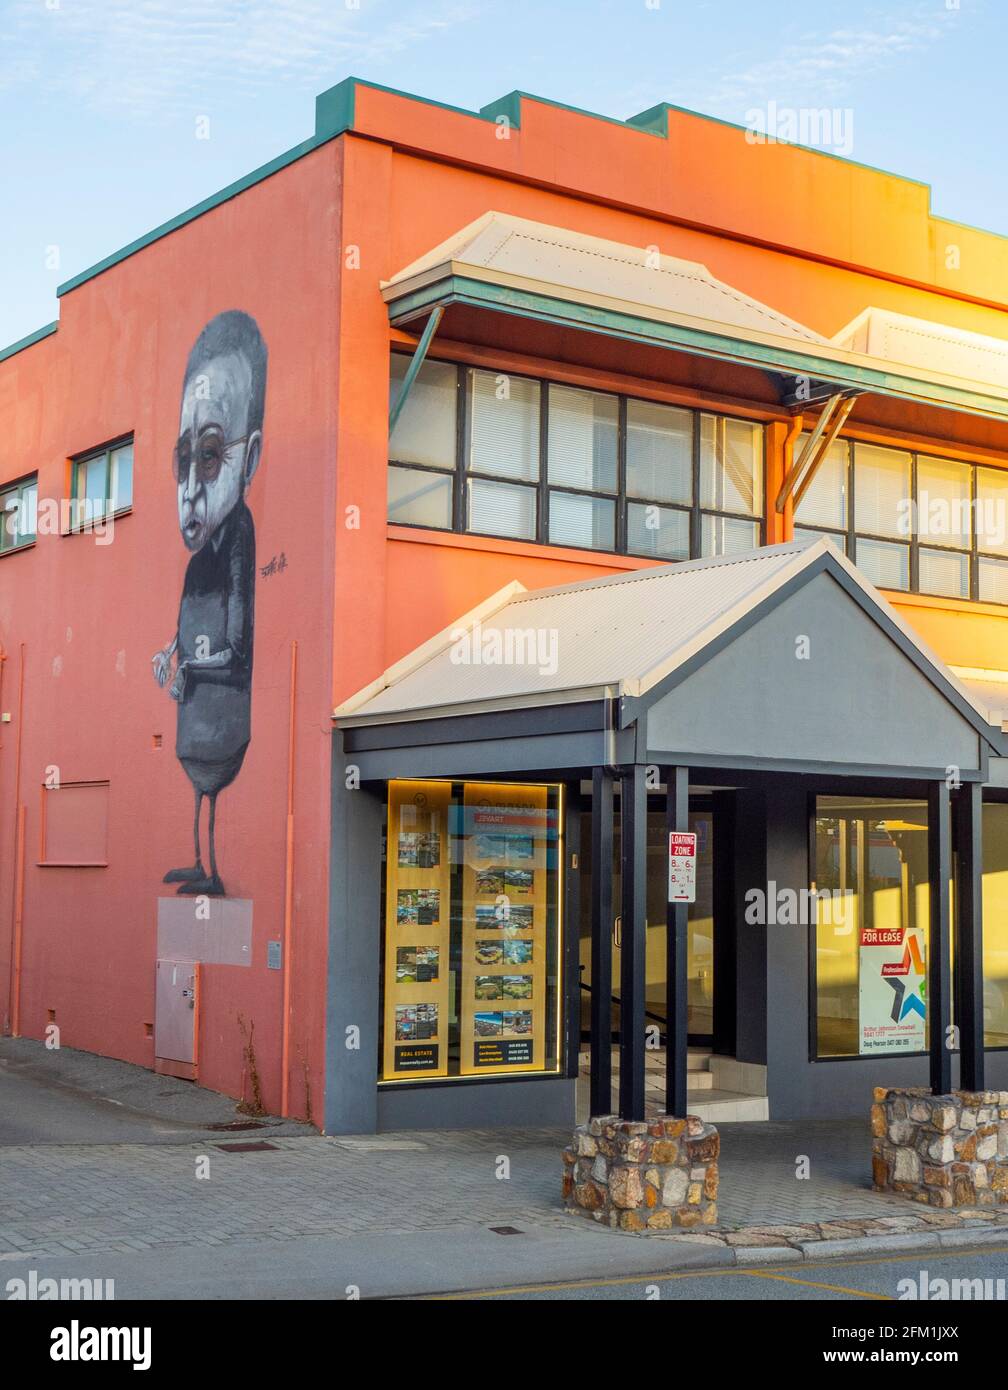 Commercial building with a mural painted on the side of the building in Albany Western Australia Stock Photo